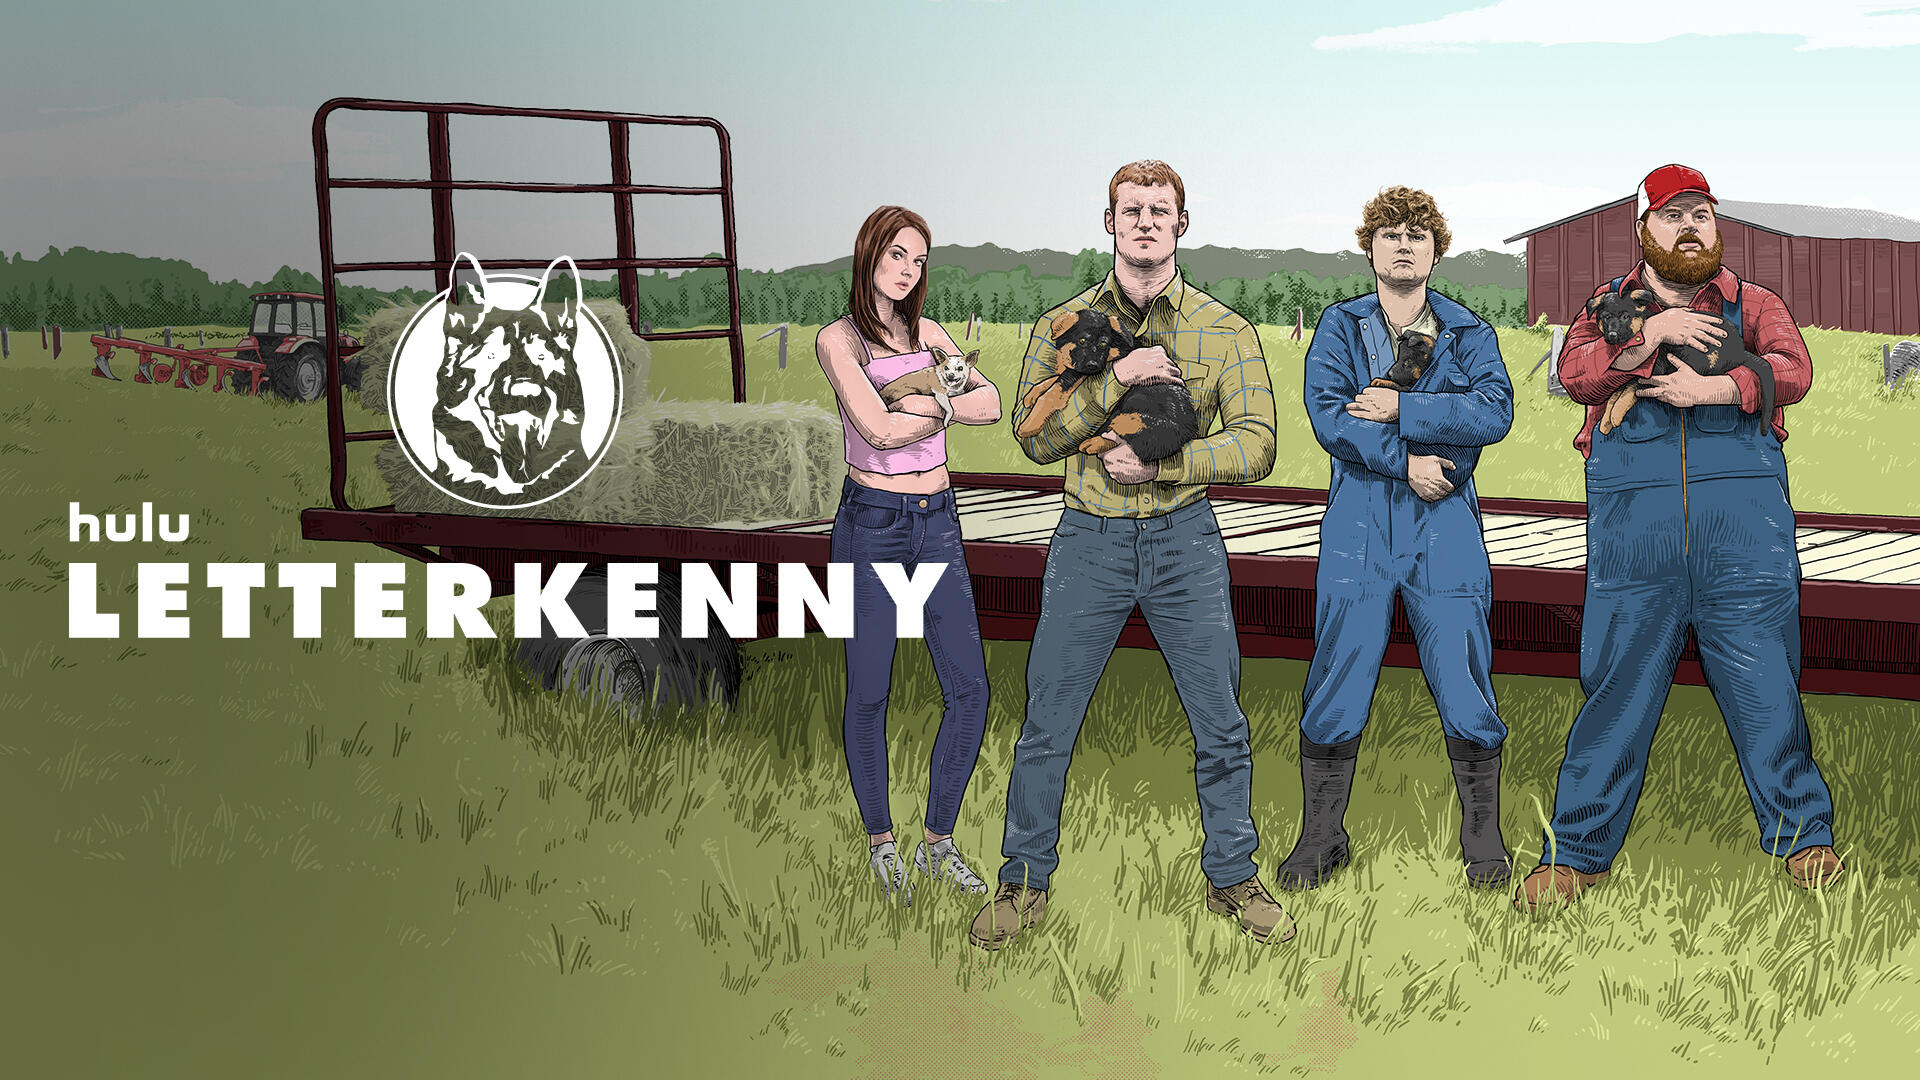 Letterkenny -- Season 11 -- The residents of Letterkenny belong to one of three groups: the Hicks, the Skids, and the Hockey Players, who are constantly feuding with each other over seemingly trivial matters that often end with someone getting their ass kicked. In season 11, the Hockey Players have unwanted guests at their beer league game, the Hicks determine the best flavor of chip, the Skids work to improve their business, influencers descend on Letterkenny…and that’s just for starters, buddy. (Courtesy of Hulu)